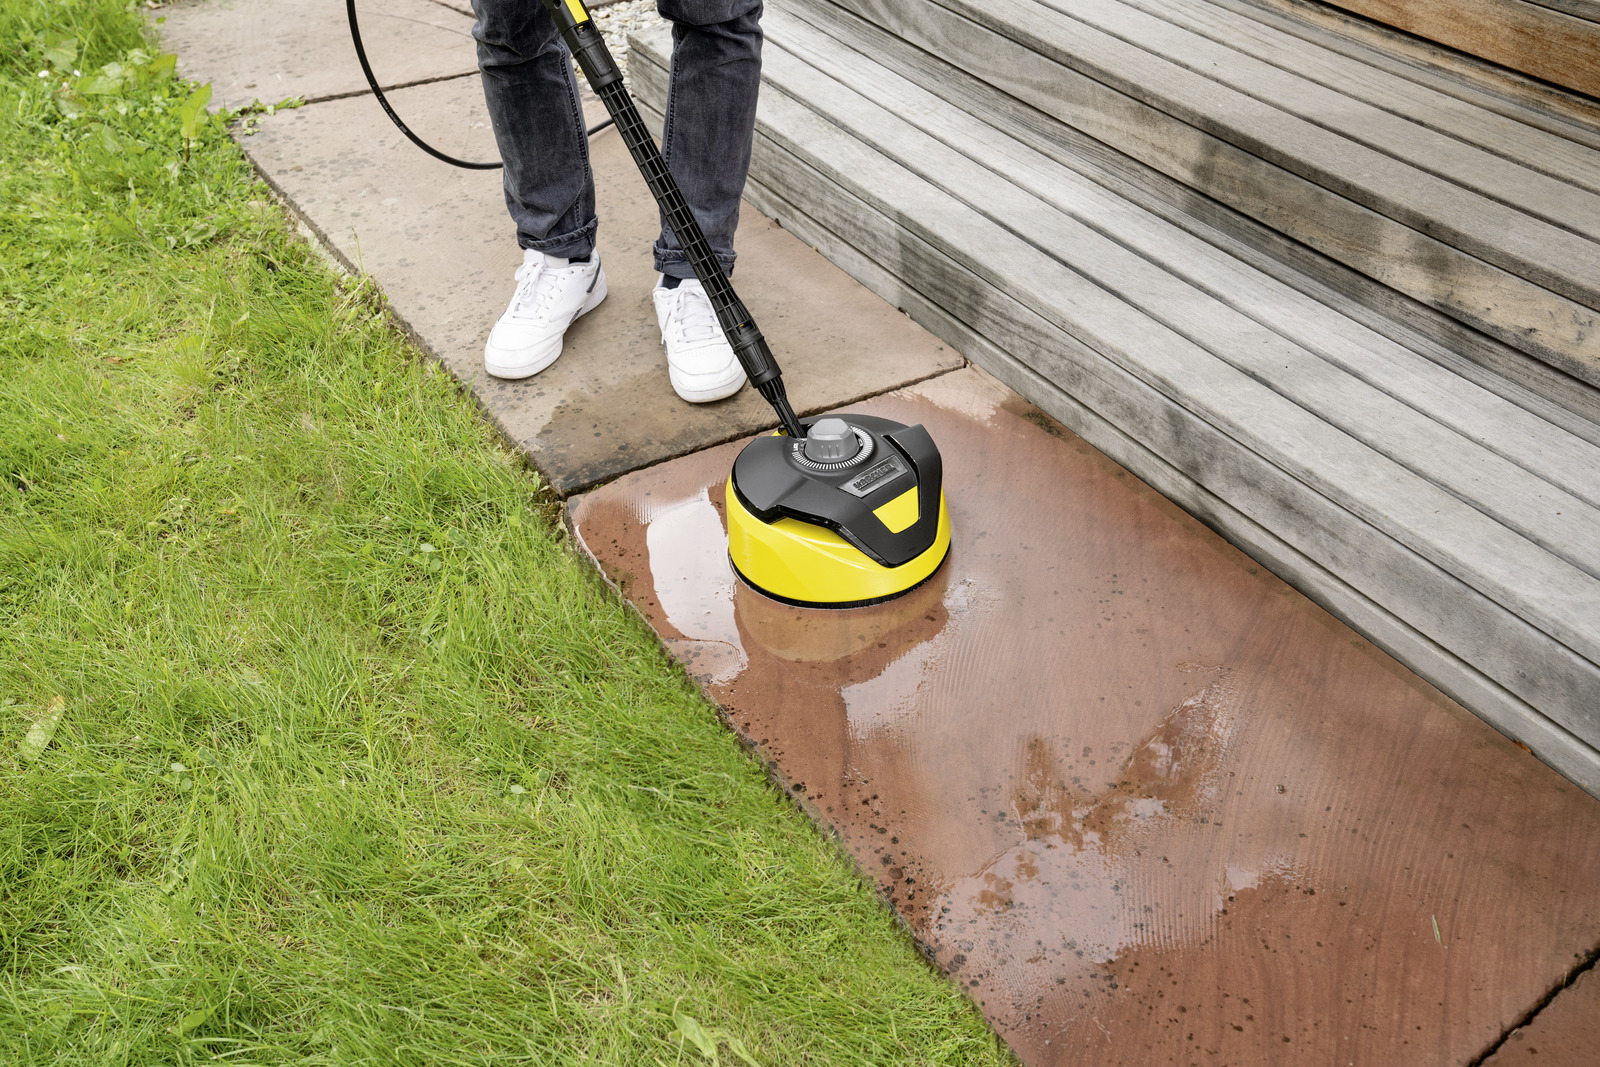 Karcher 1.324-684.0 2000 PSI 1.55 GPM K 5 Premium Smart Control CHK Cold Water Electric Pressure Washer Plus Surface Cleaner